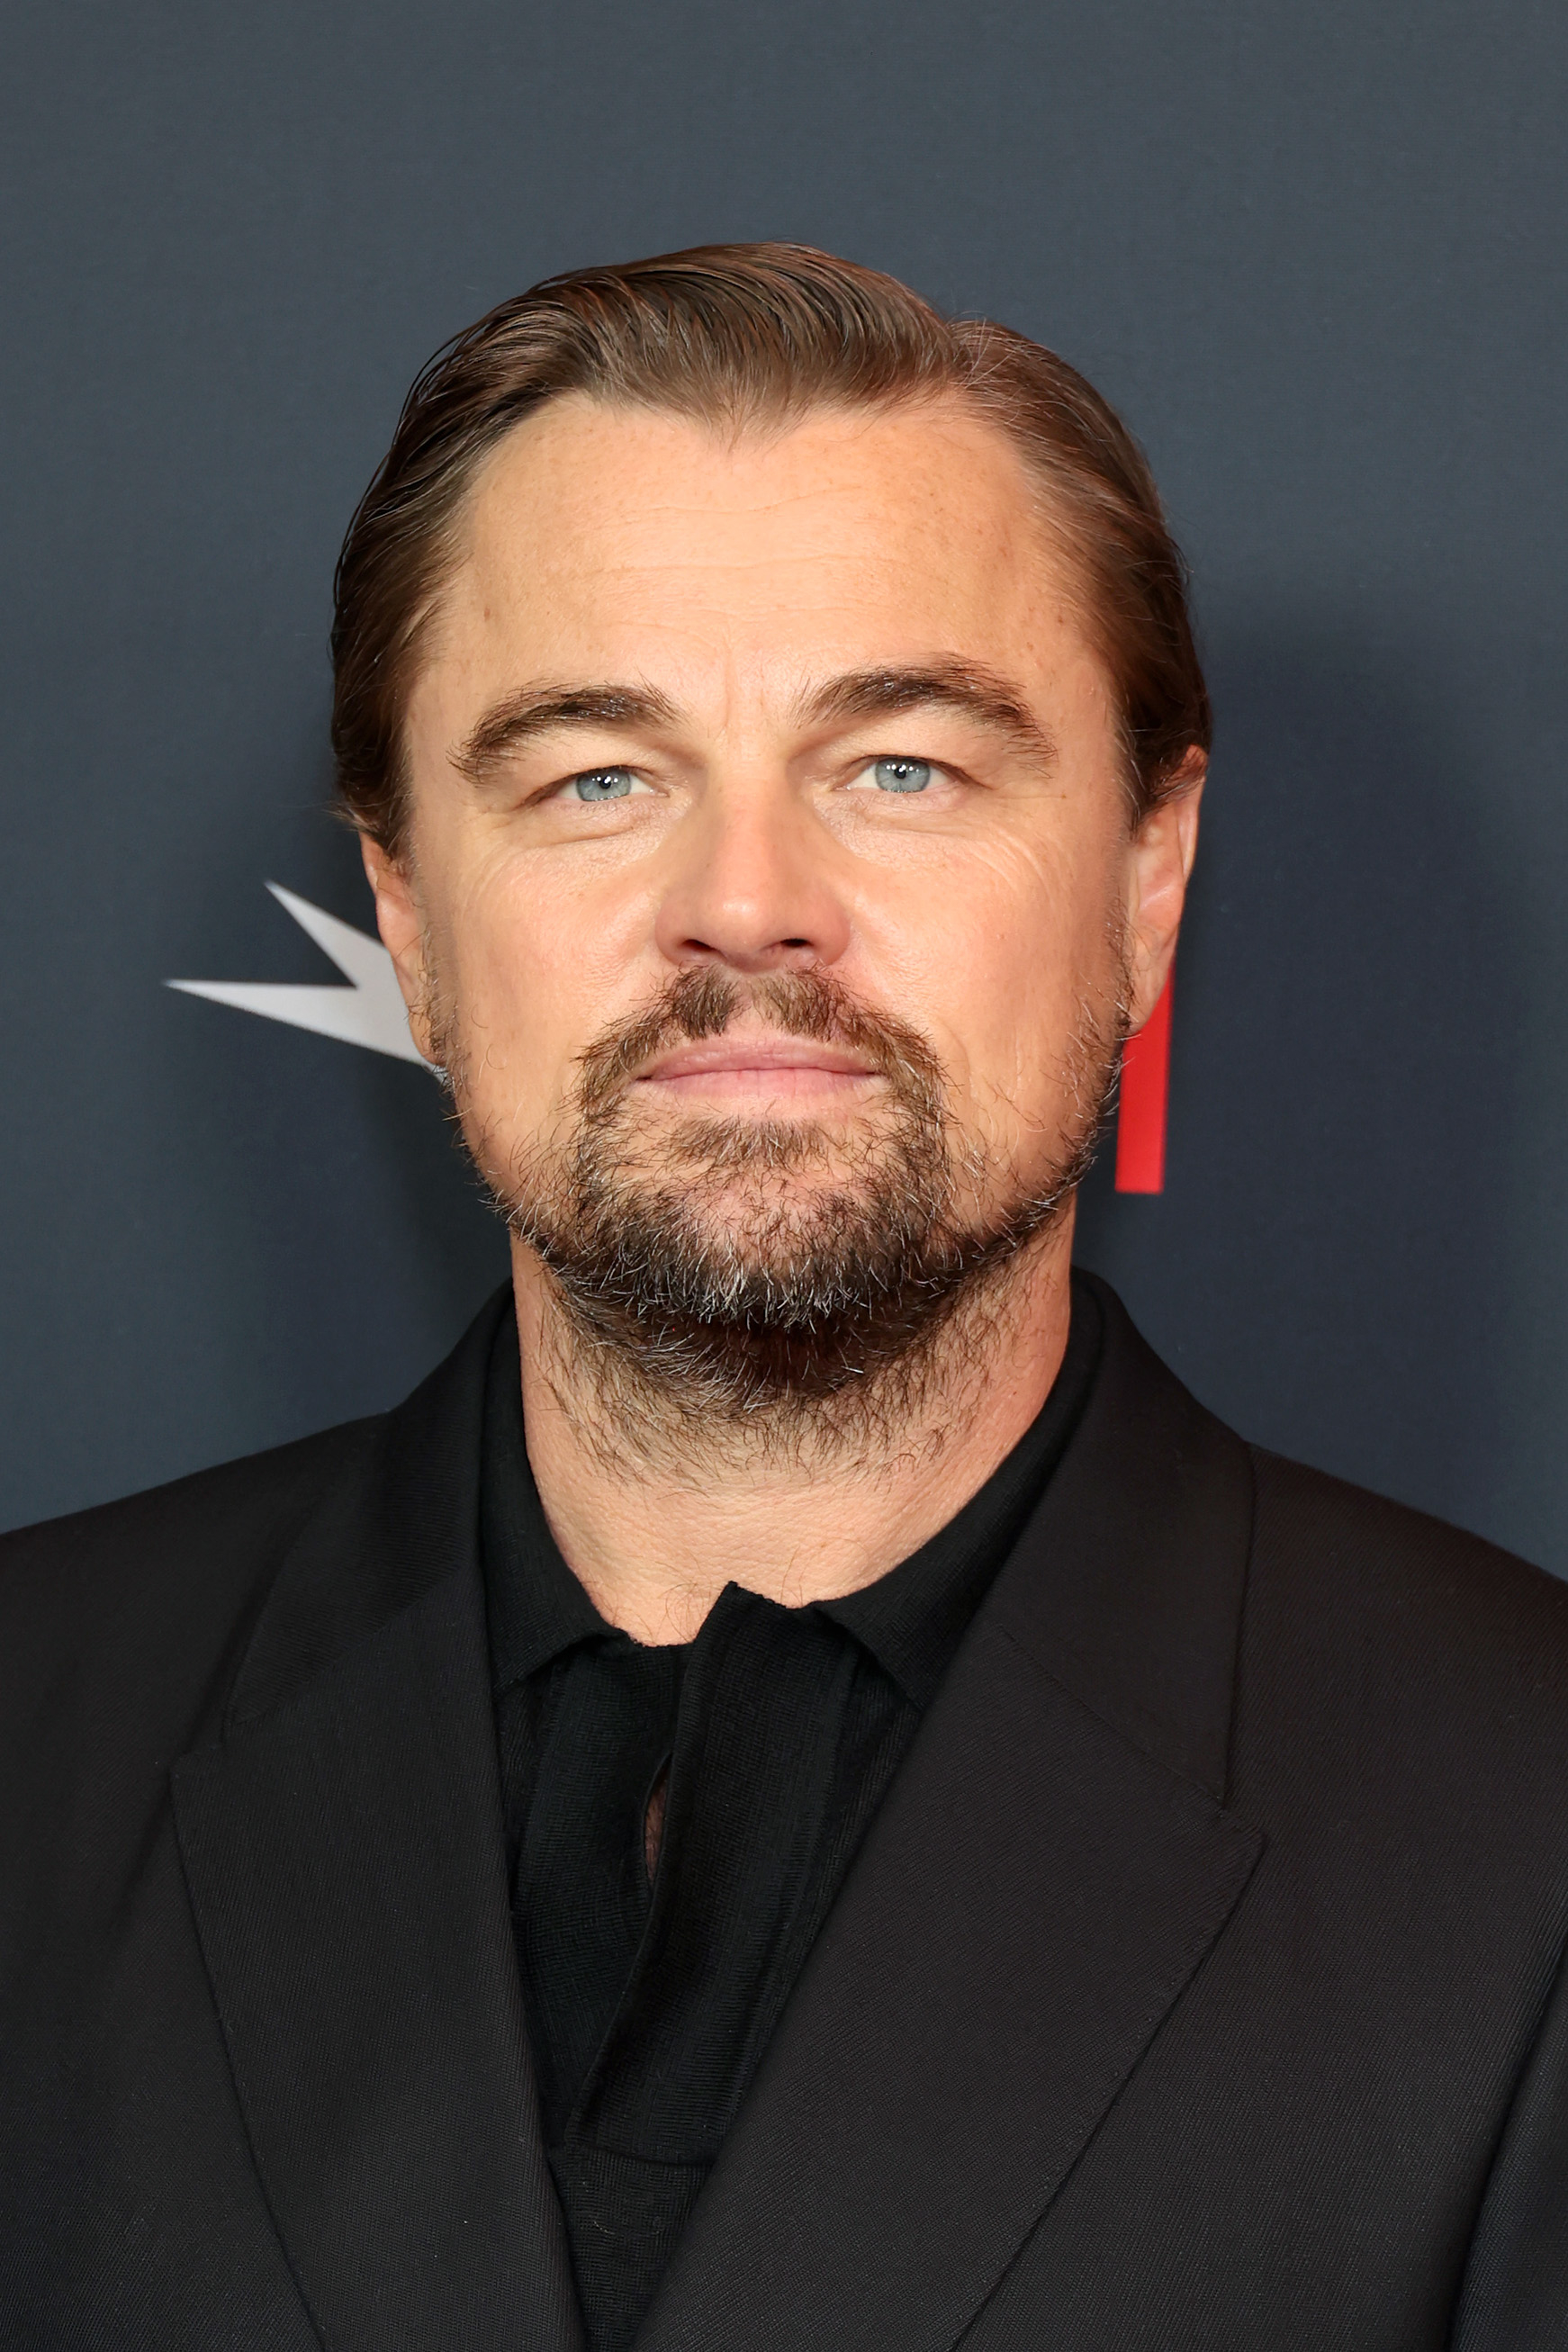 Leonardo DiCaprio in a suit at an event